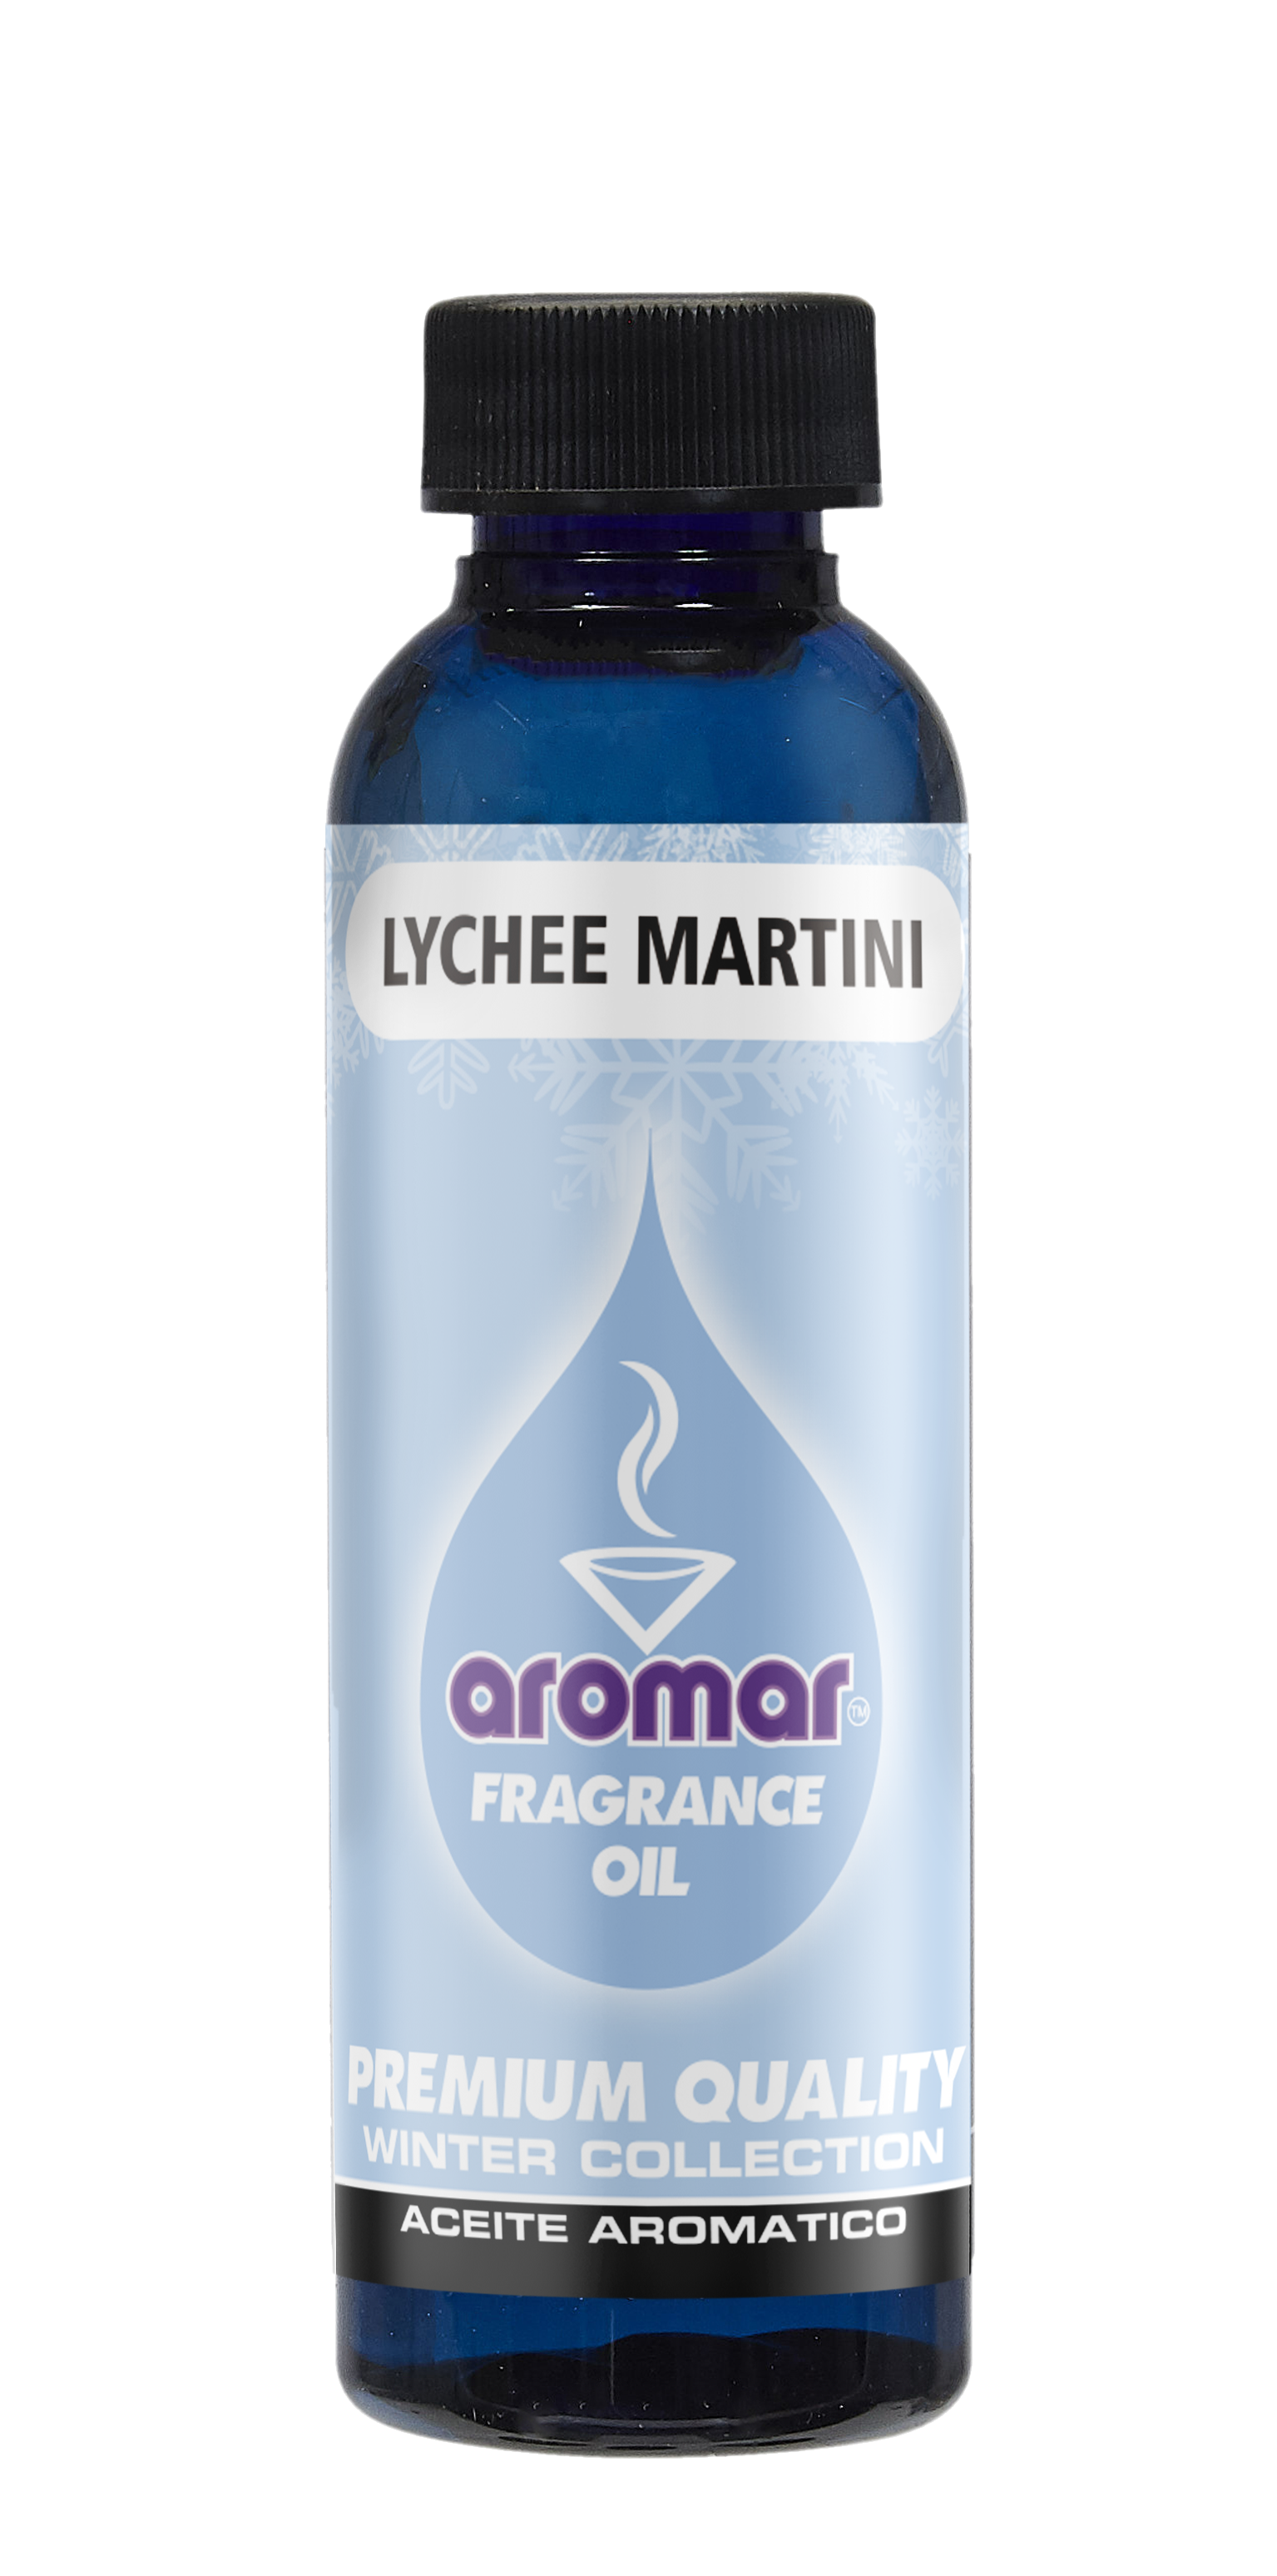 Wholesale AROMAR LYCHEE MARTINI FRAGRANCE OIL for your store